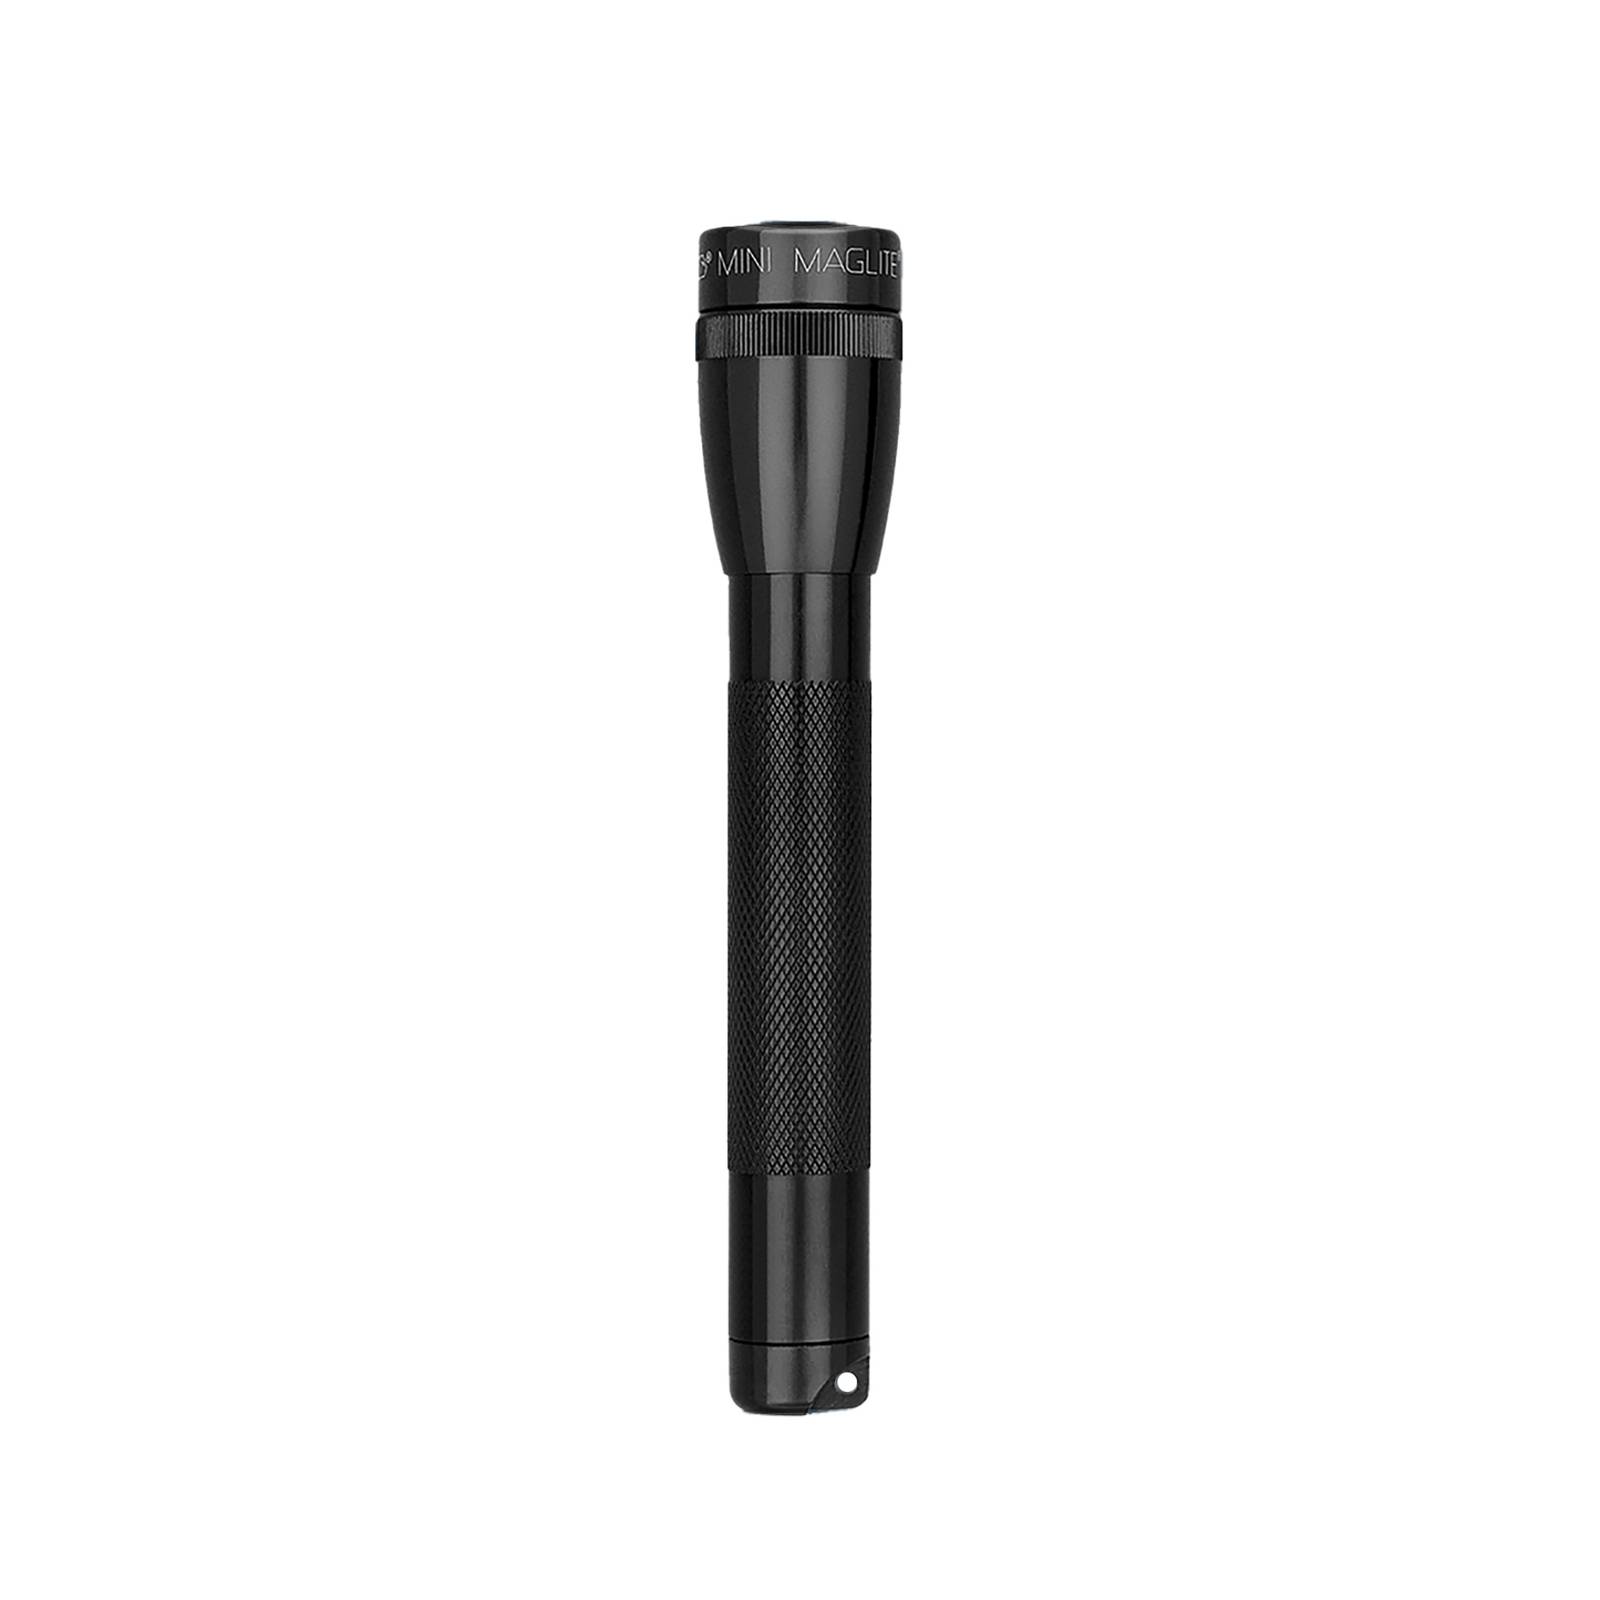 Maglite Xenon lommelygte Mini 2-Cell AA Combo sort